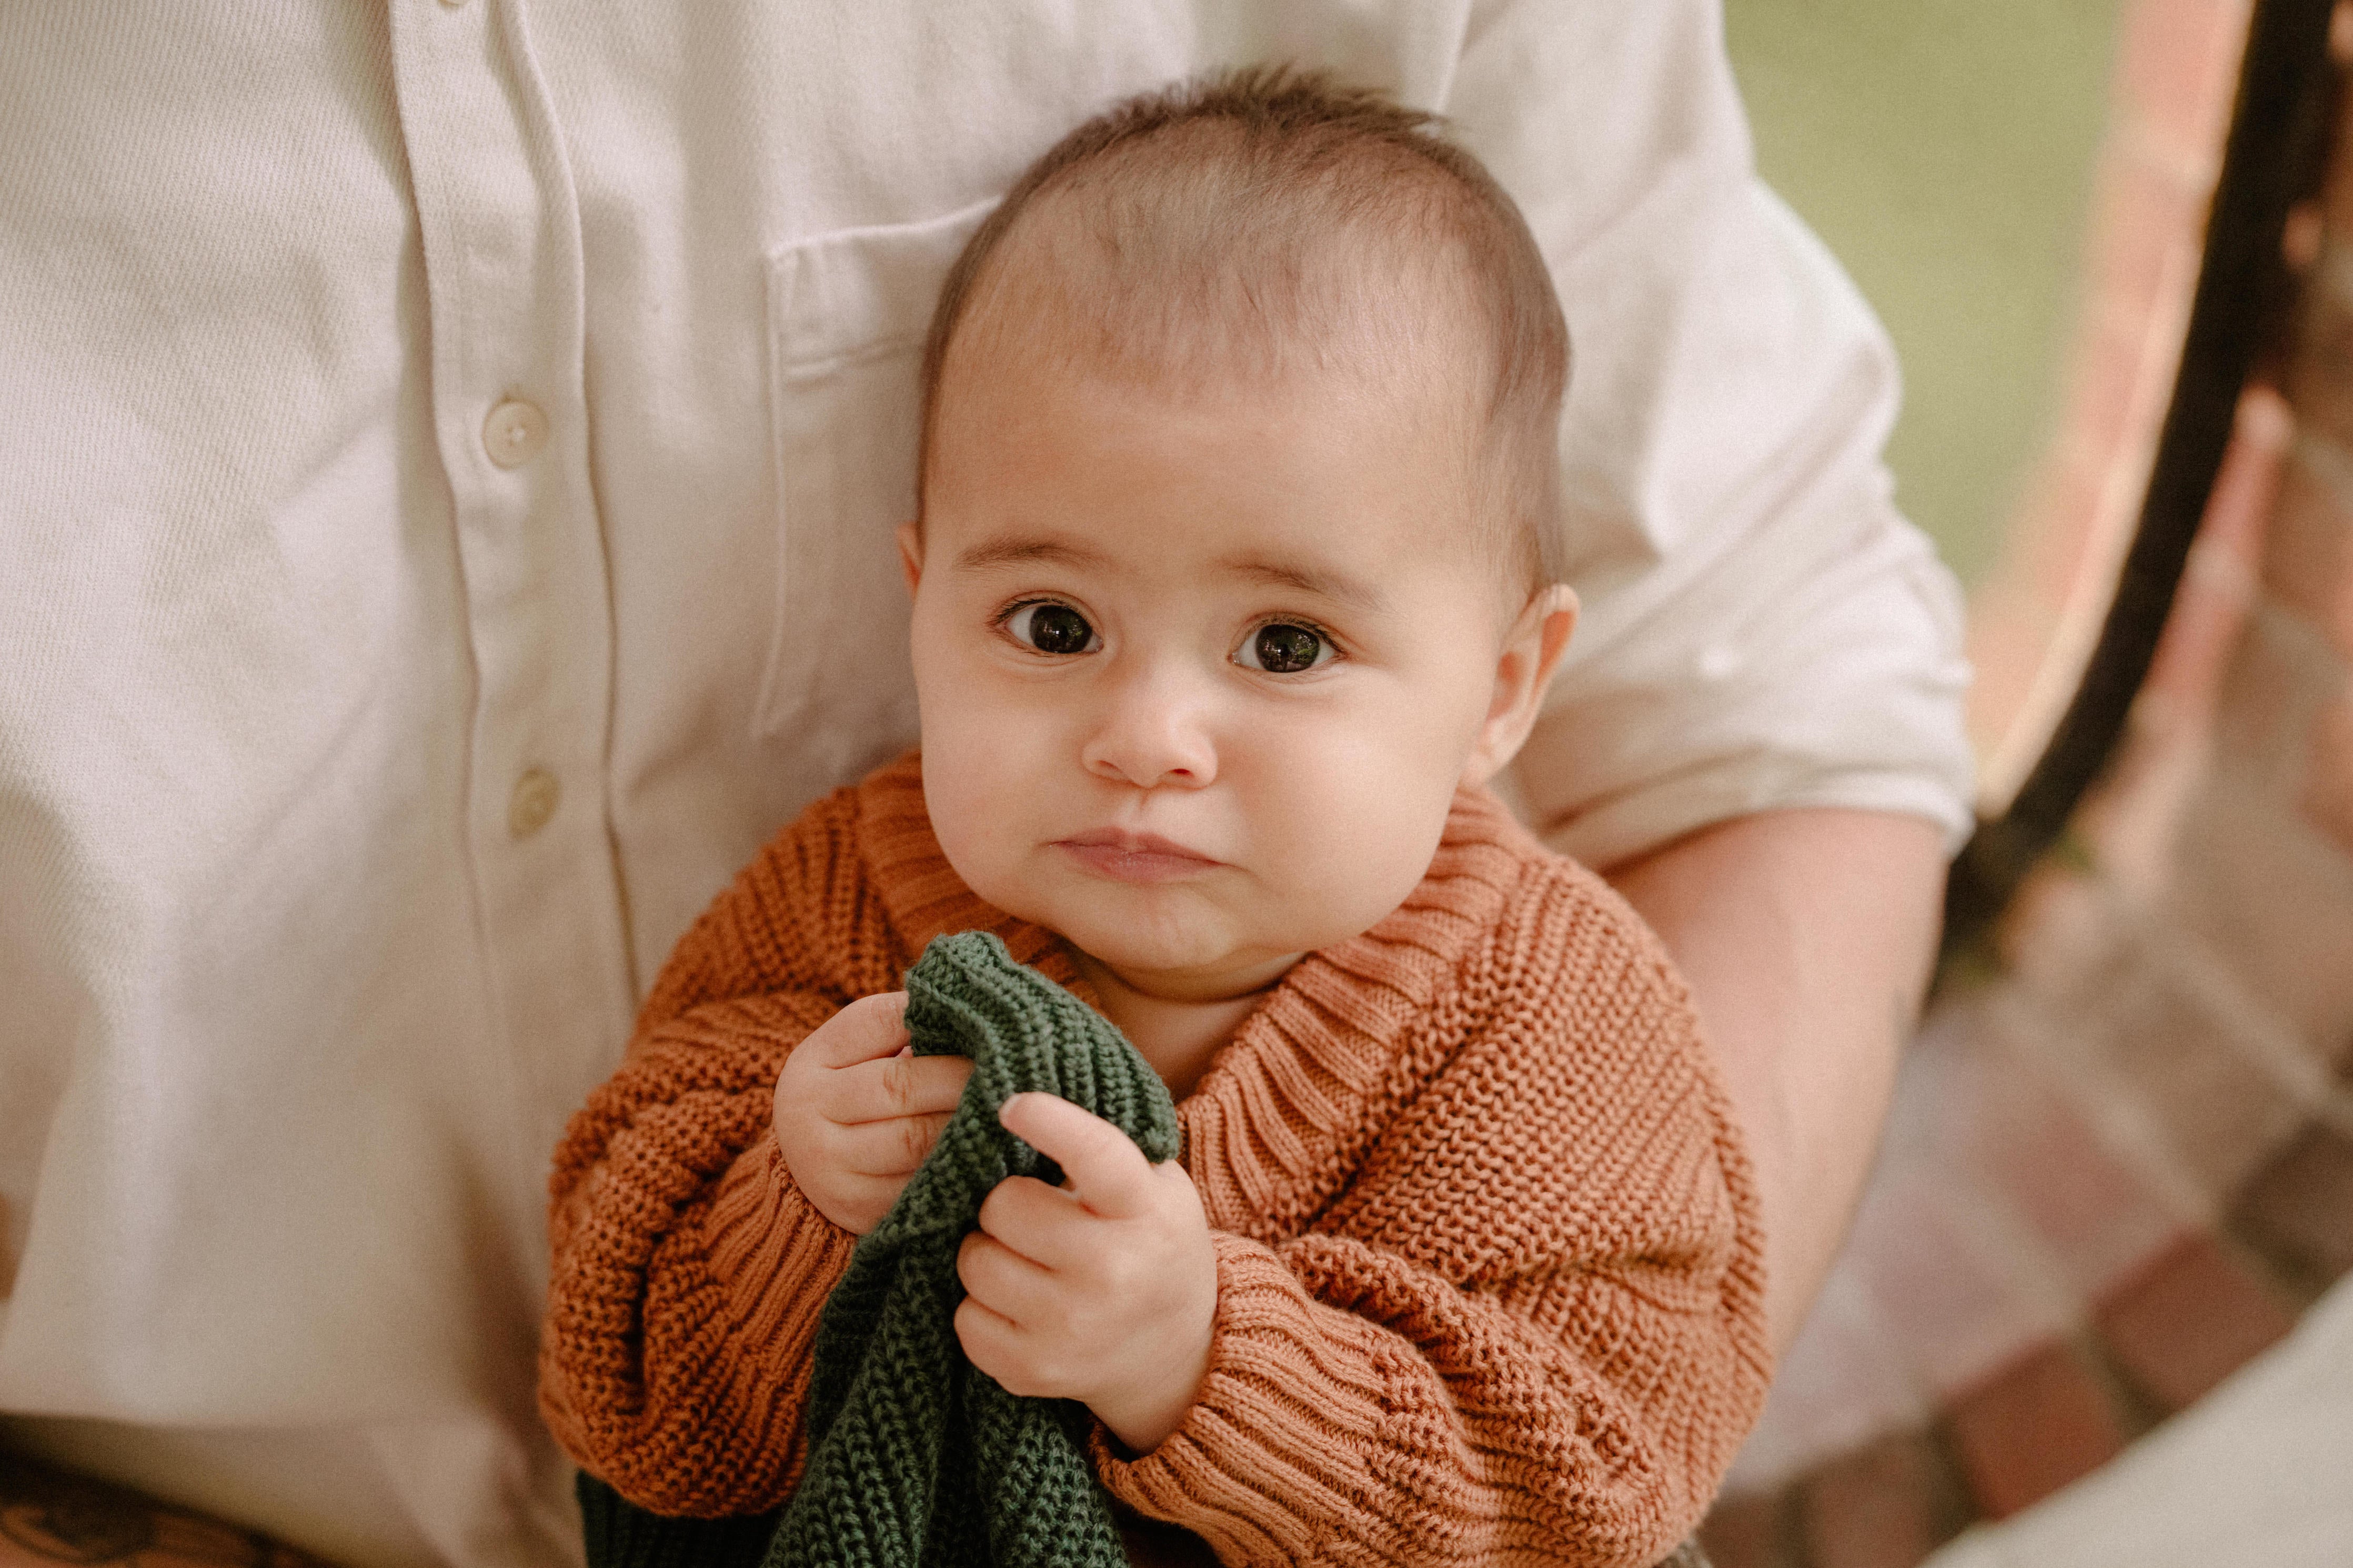 Cute baby wearing YoungYarn knit sweater in meerkat color, looking directly into the camera while holding a pinegreen beanie in her hands.